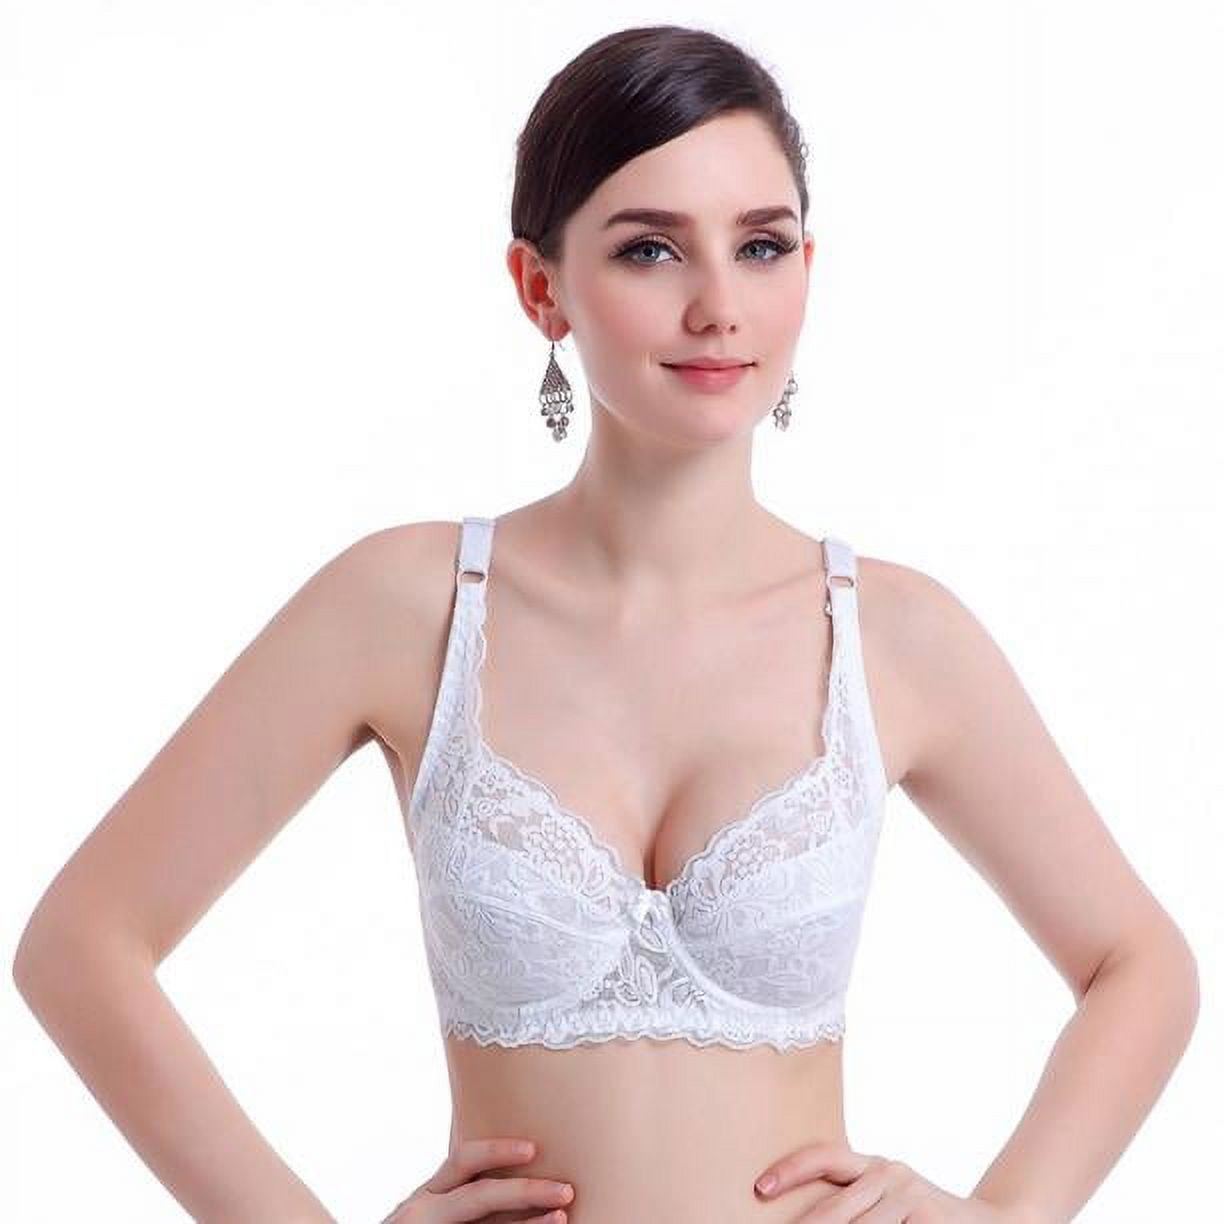 Shop Bra Size 38b To 85b with great discounts and prices online